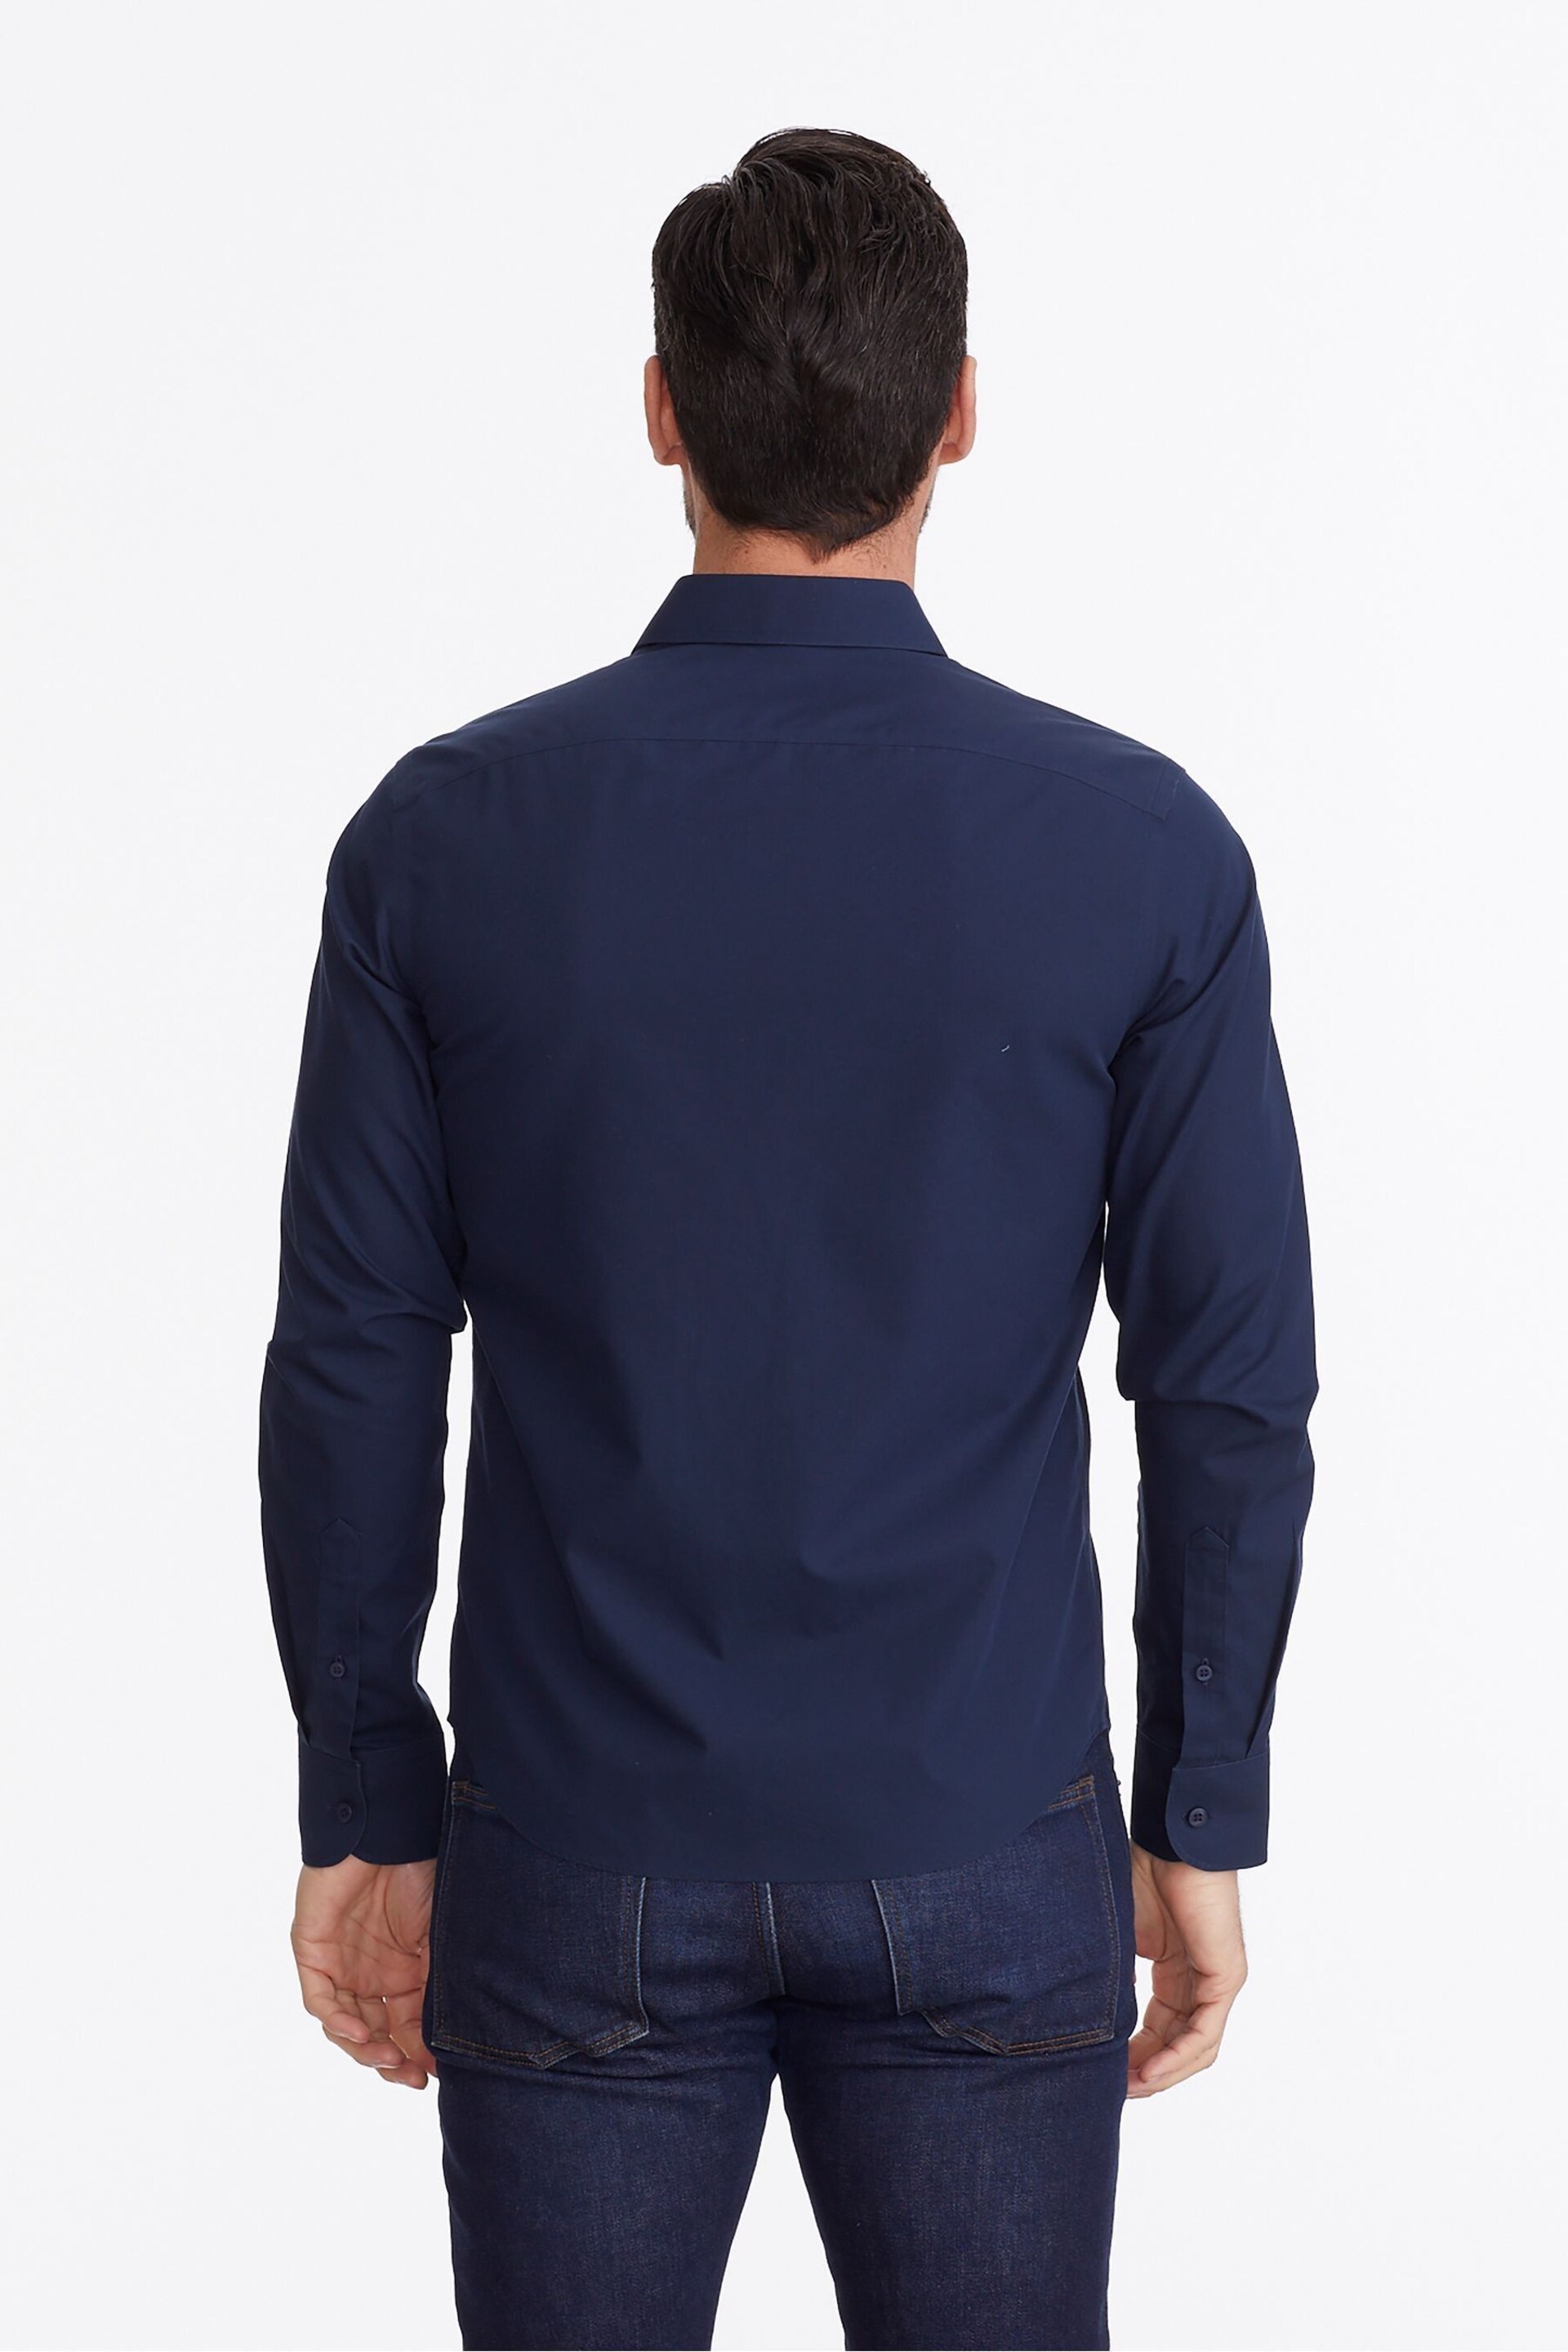 UNTUCKit Dark Blue Wrinkle-Free Relaxed Fit Castello Shirt - Image 2 of 6